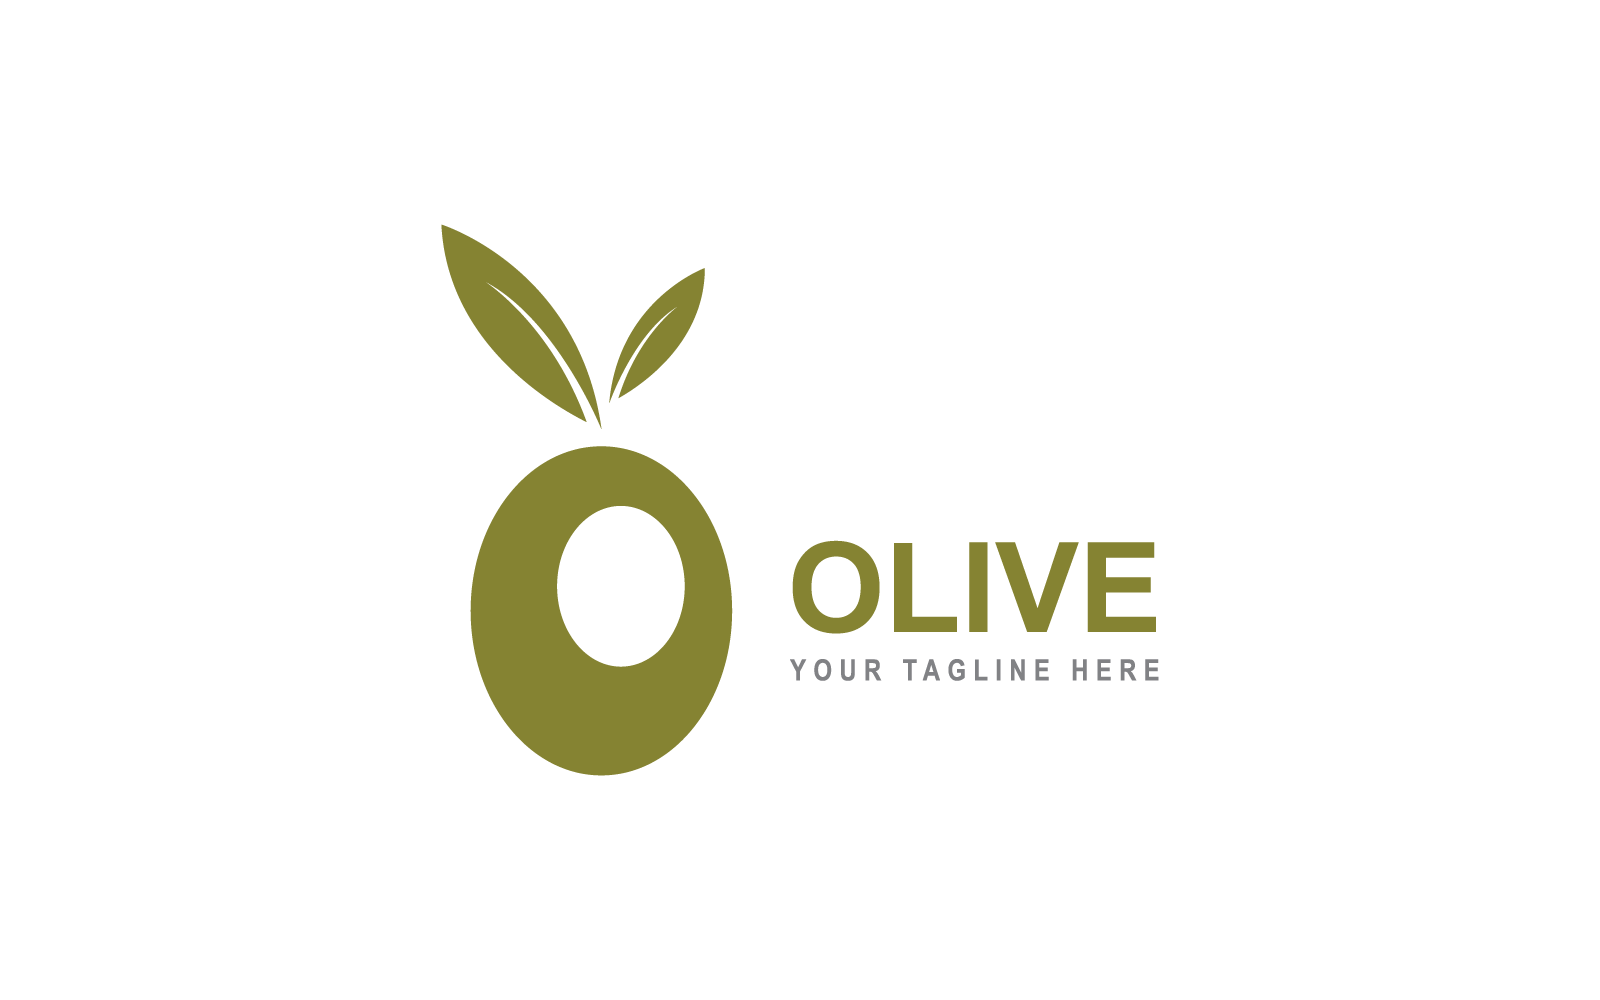 Olive logo template icon vector flat design